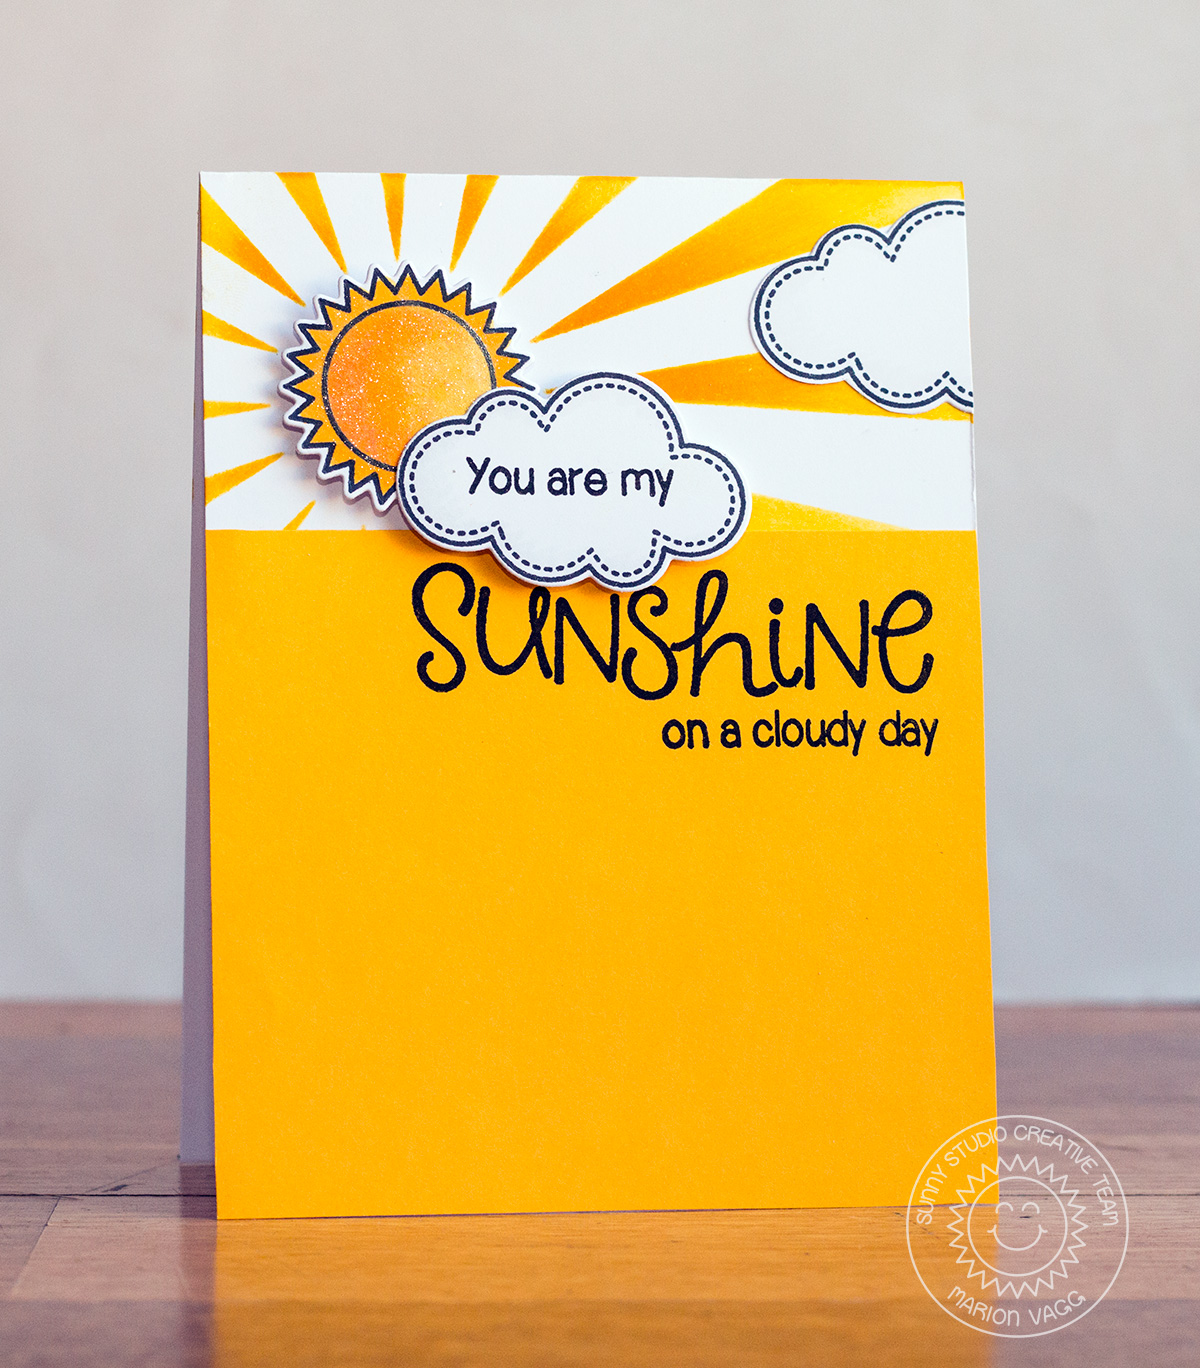 You are my Sunshine | Marion Vagg